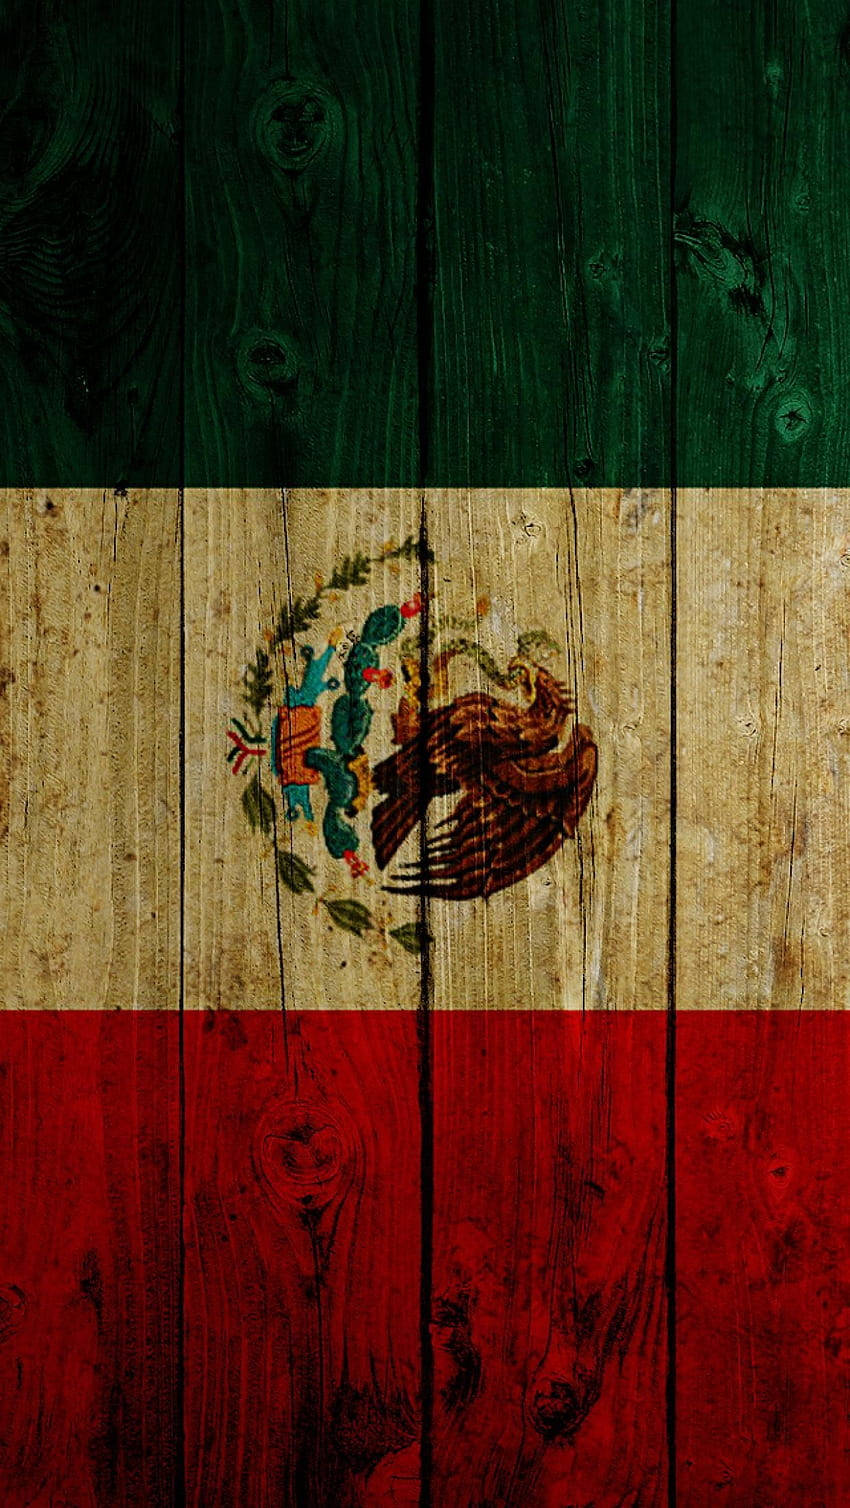 Red white and green bird printed flag photo  Free Mexico Image on  Unsplash